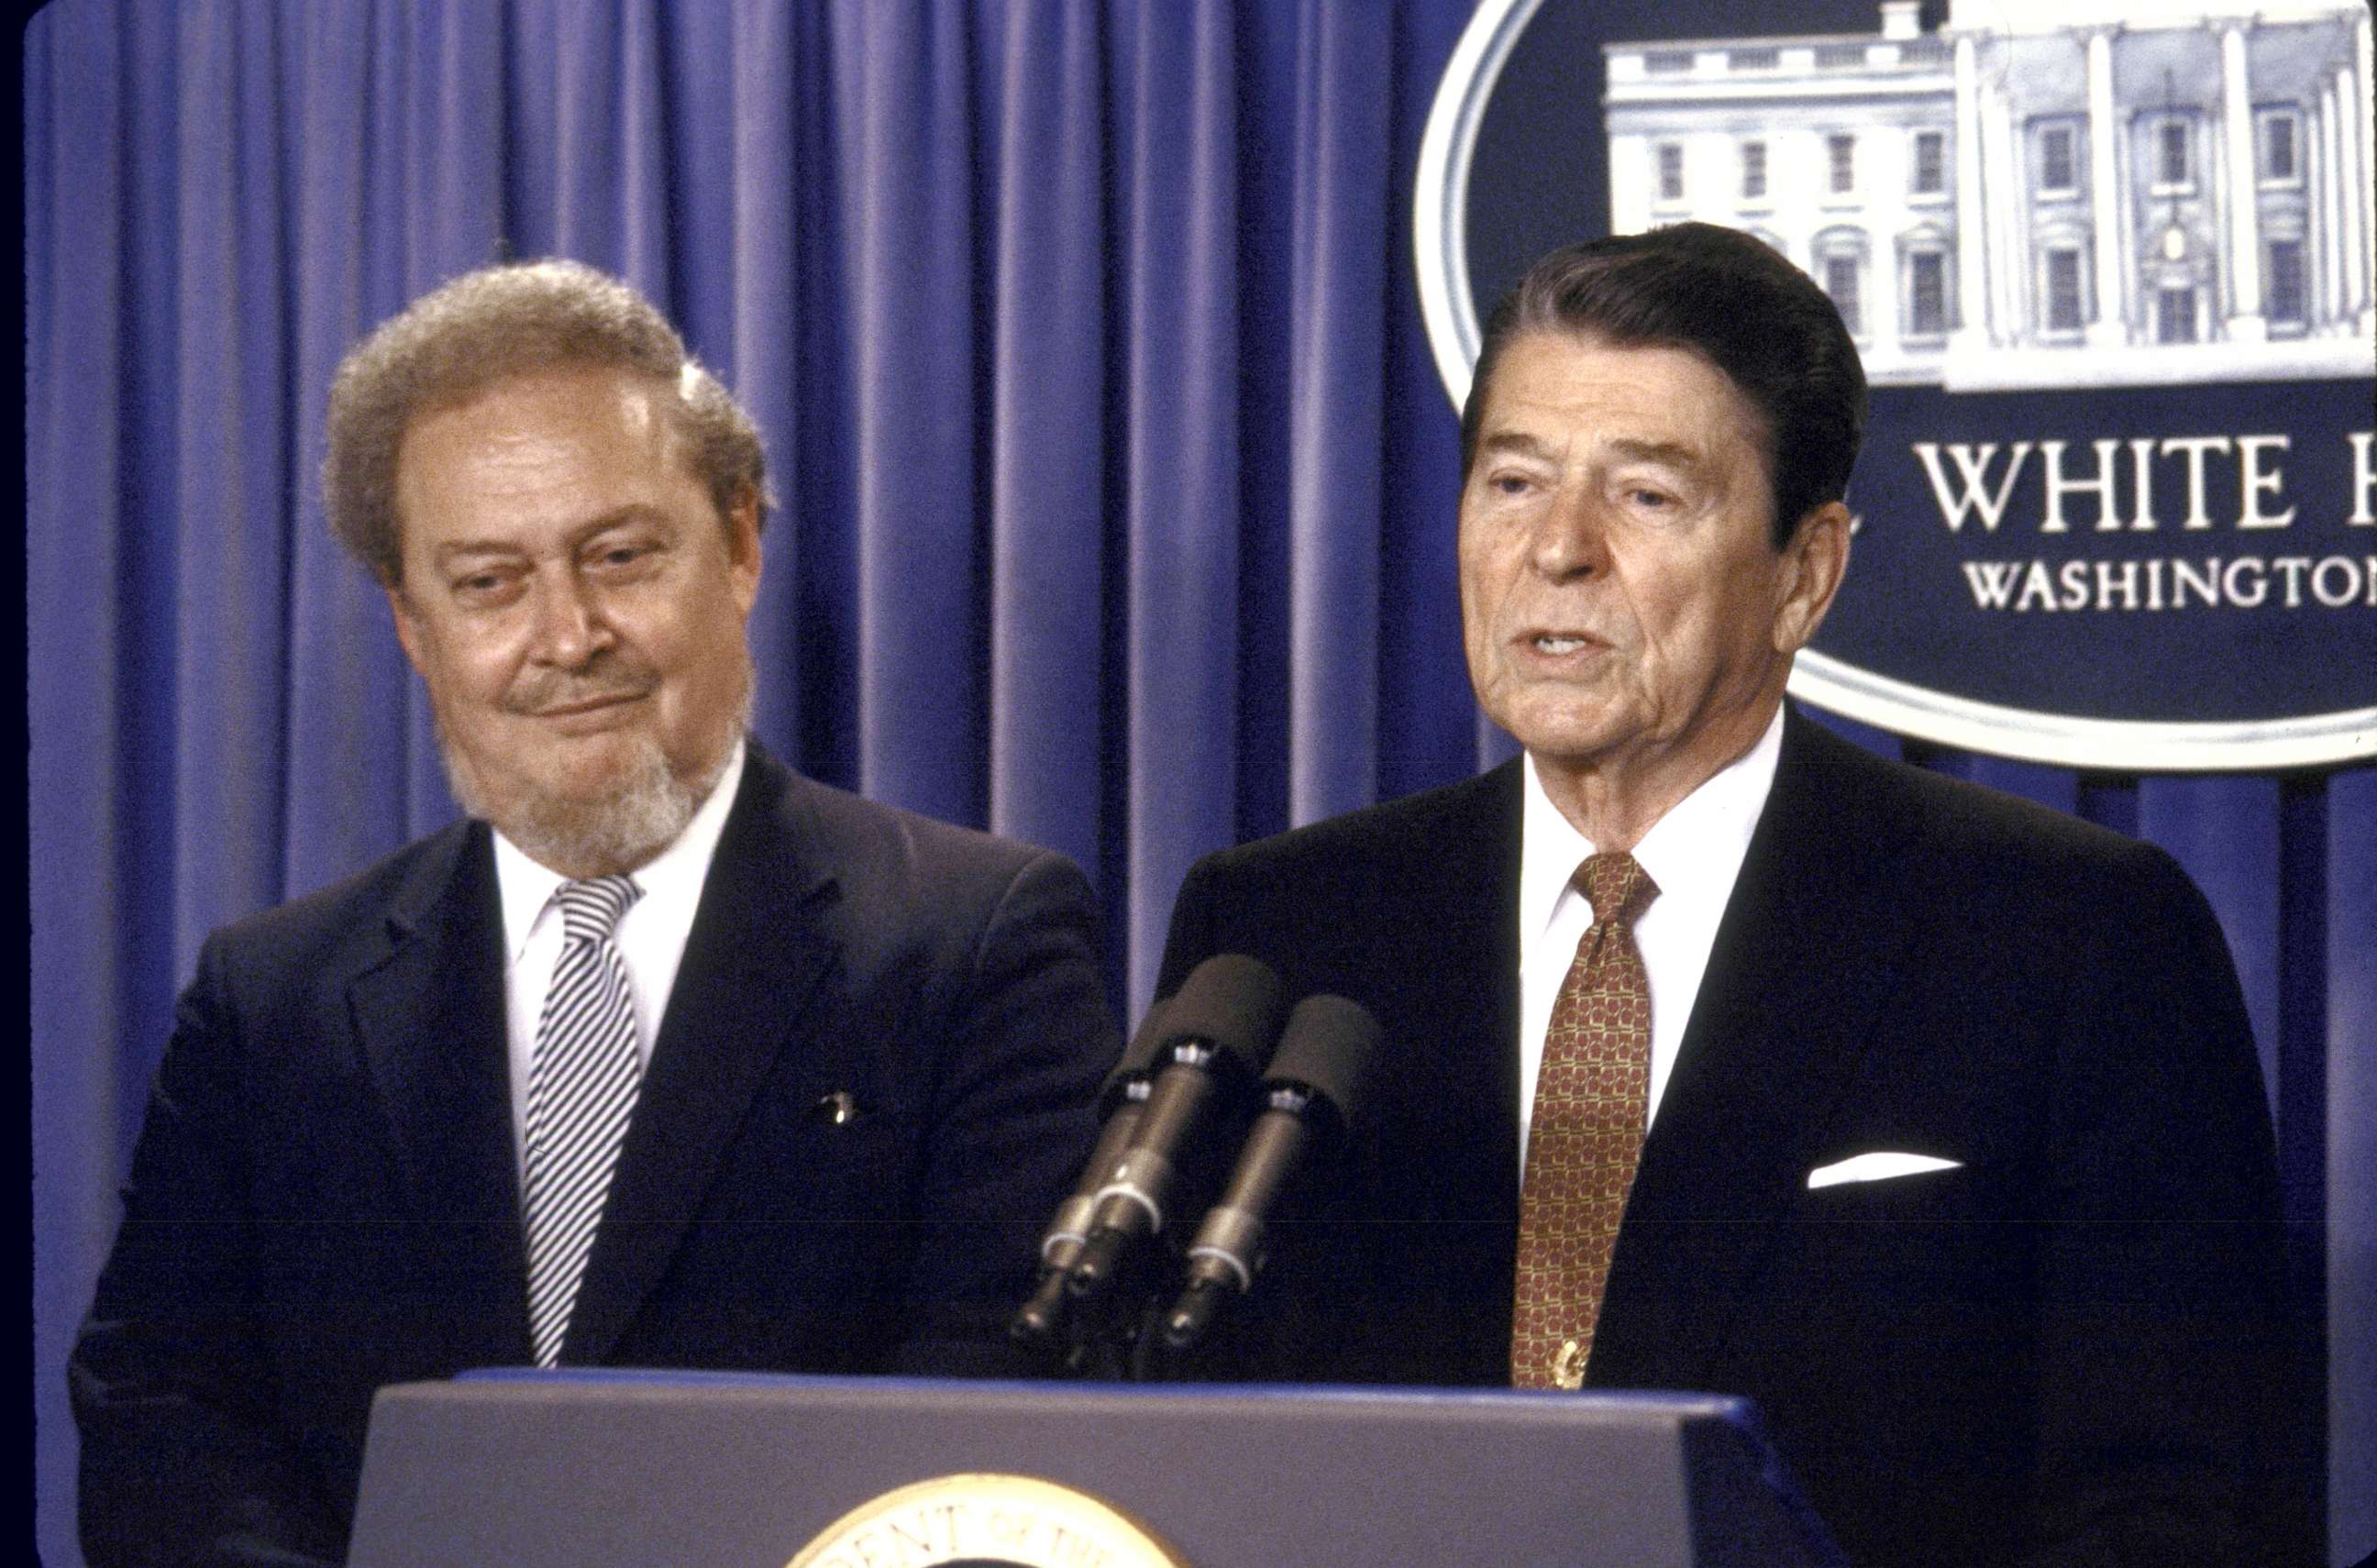 PHOTO: President Ronald W. Reagan speaking at a press conference while standing with his Supreme Court Justice nominee Robert H. Bork, July 1, 1987.